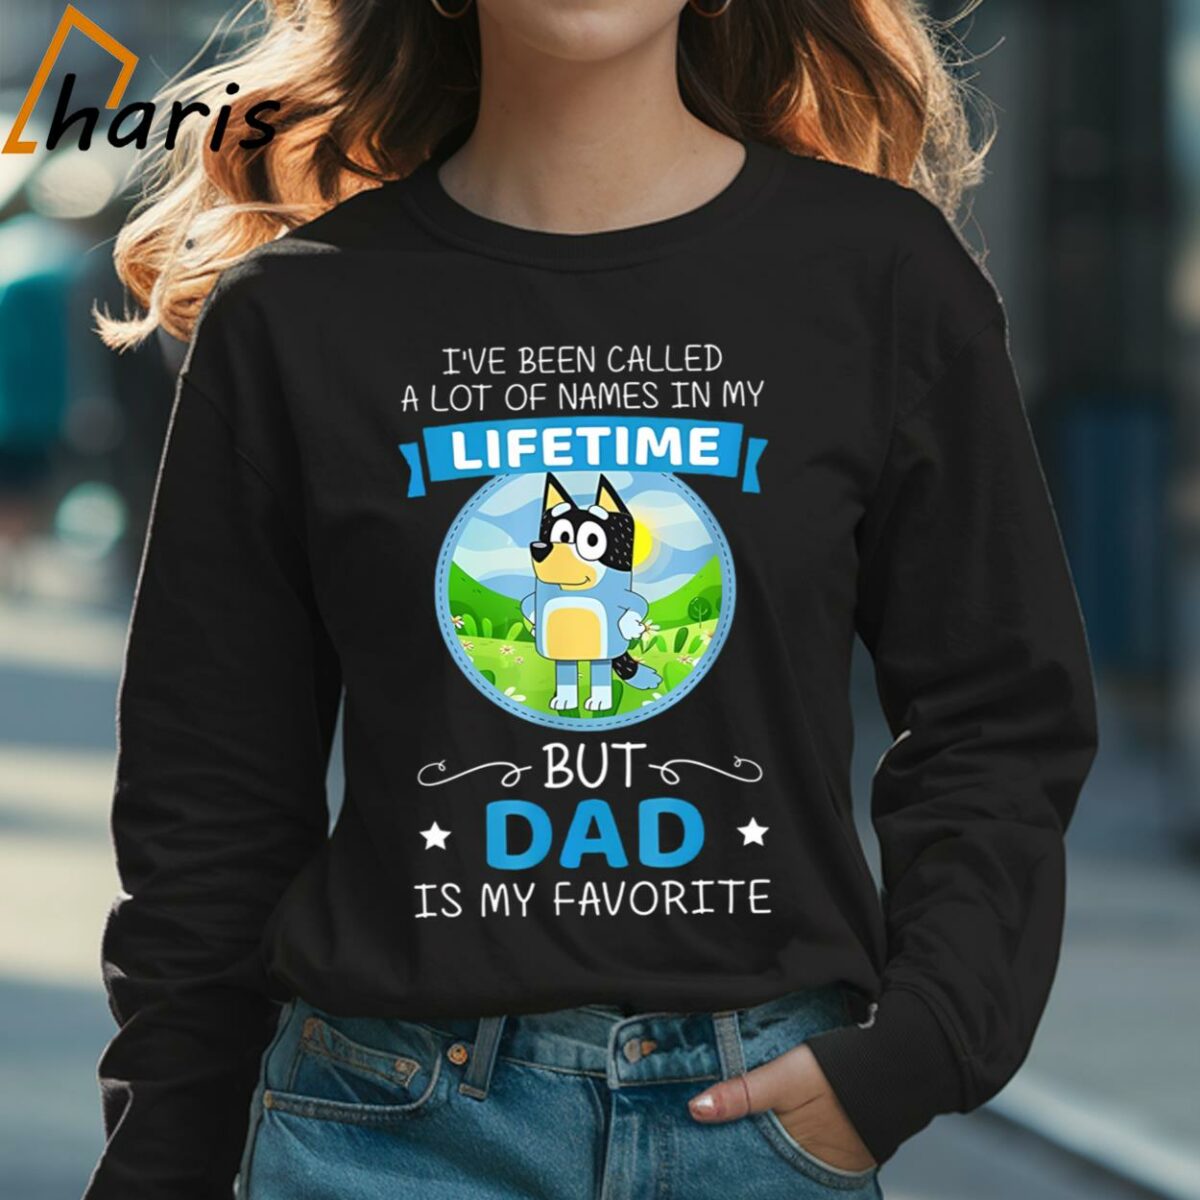 Ive Been Called A Lot Of Names In My Life Time Bluey Dad T shirt 3 Long sleeve shirt